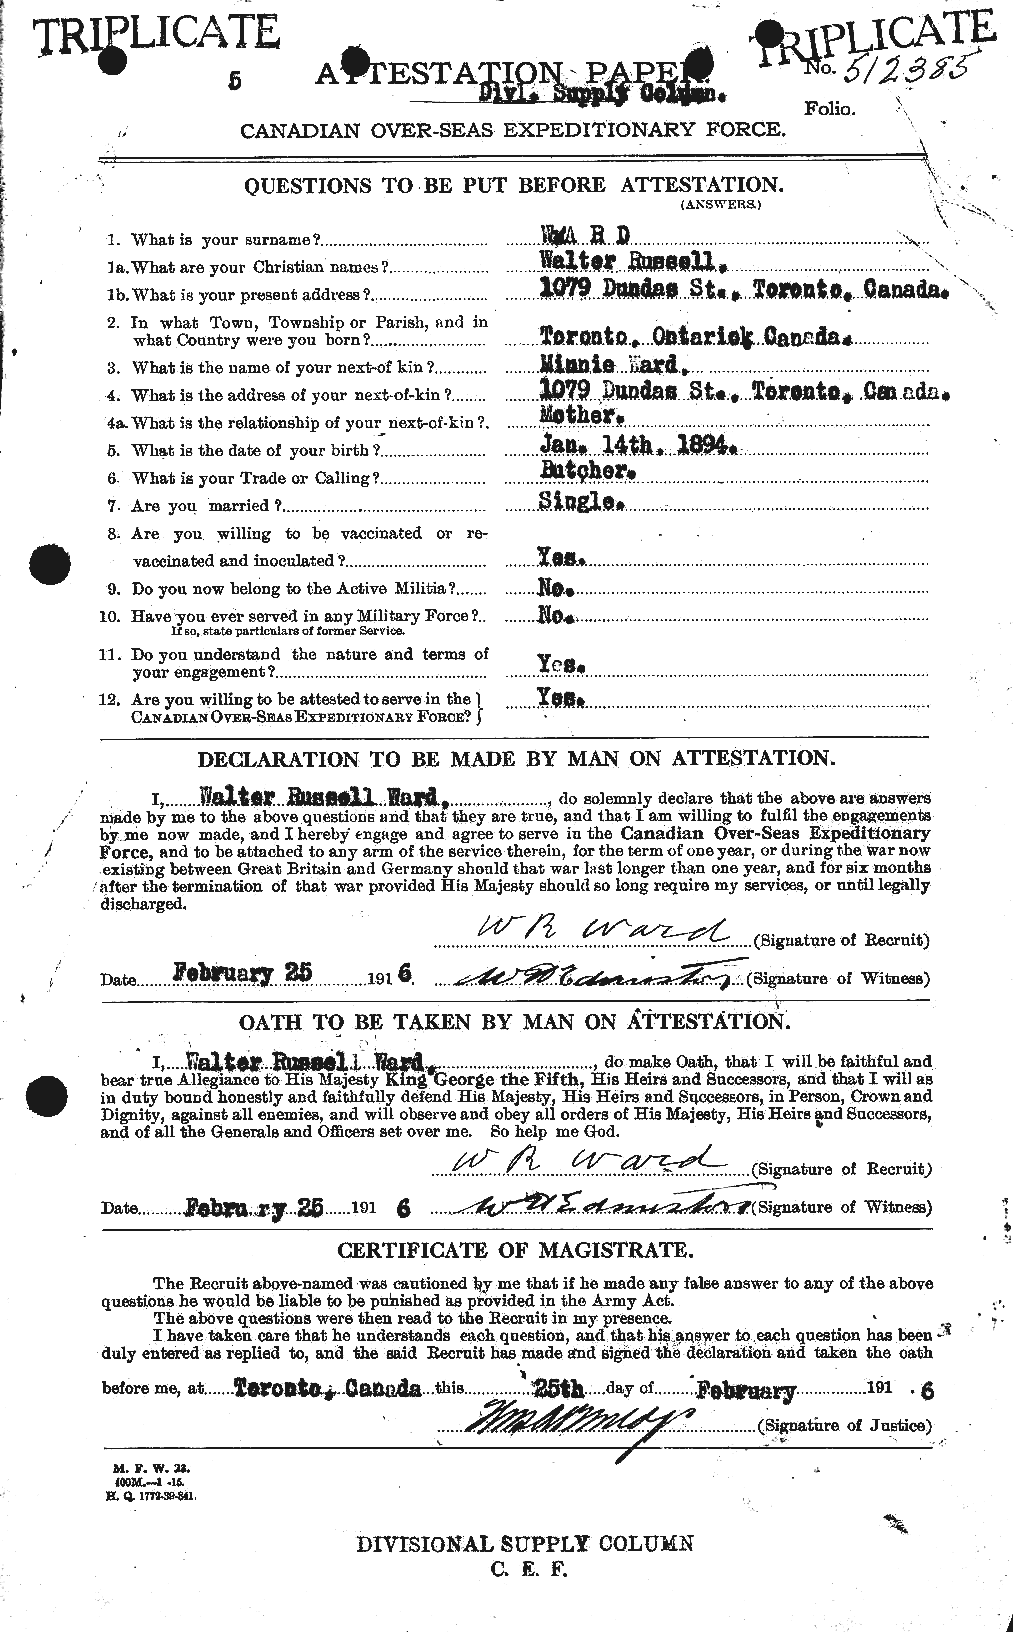 Personnel Records of the First World War - CEF 659761a